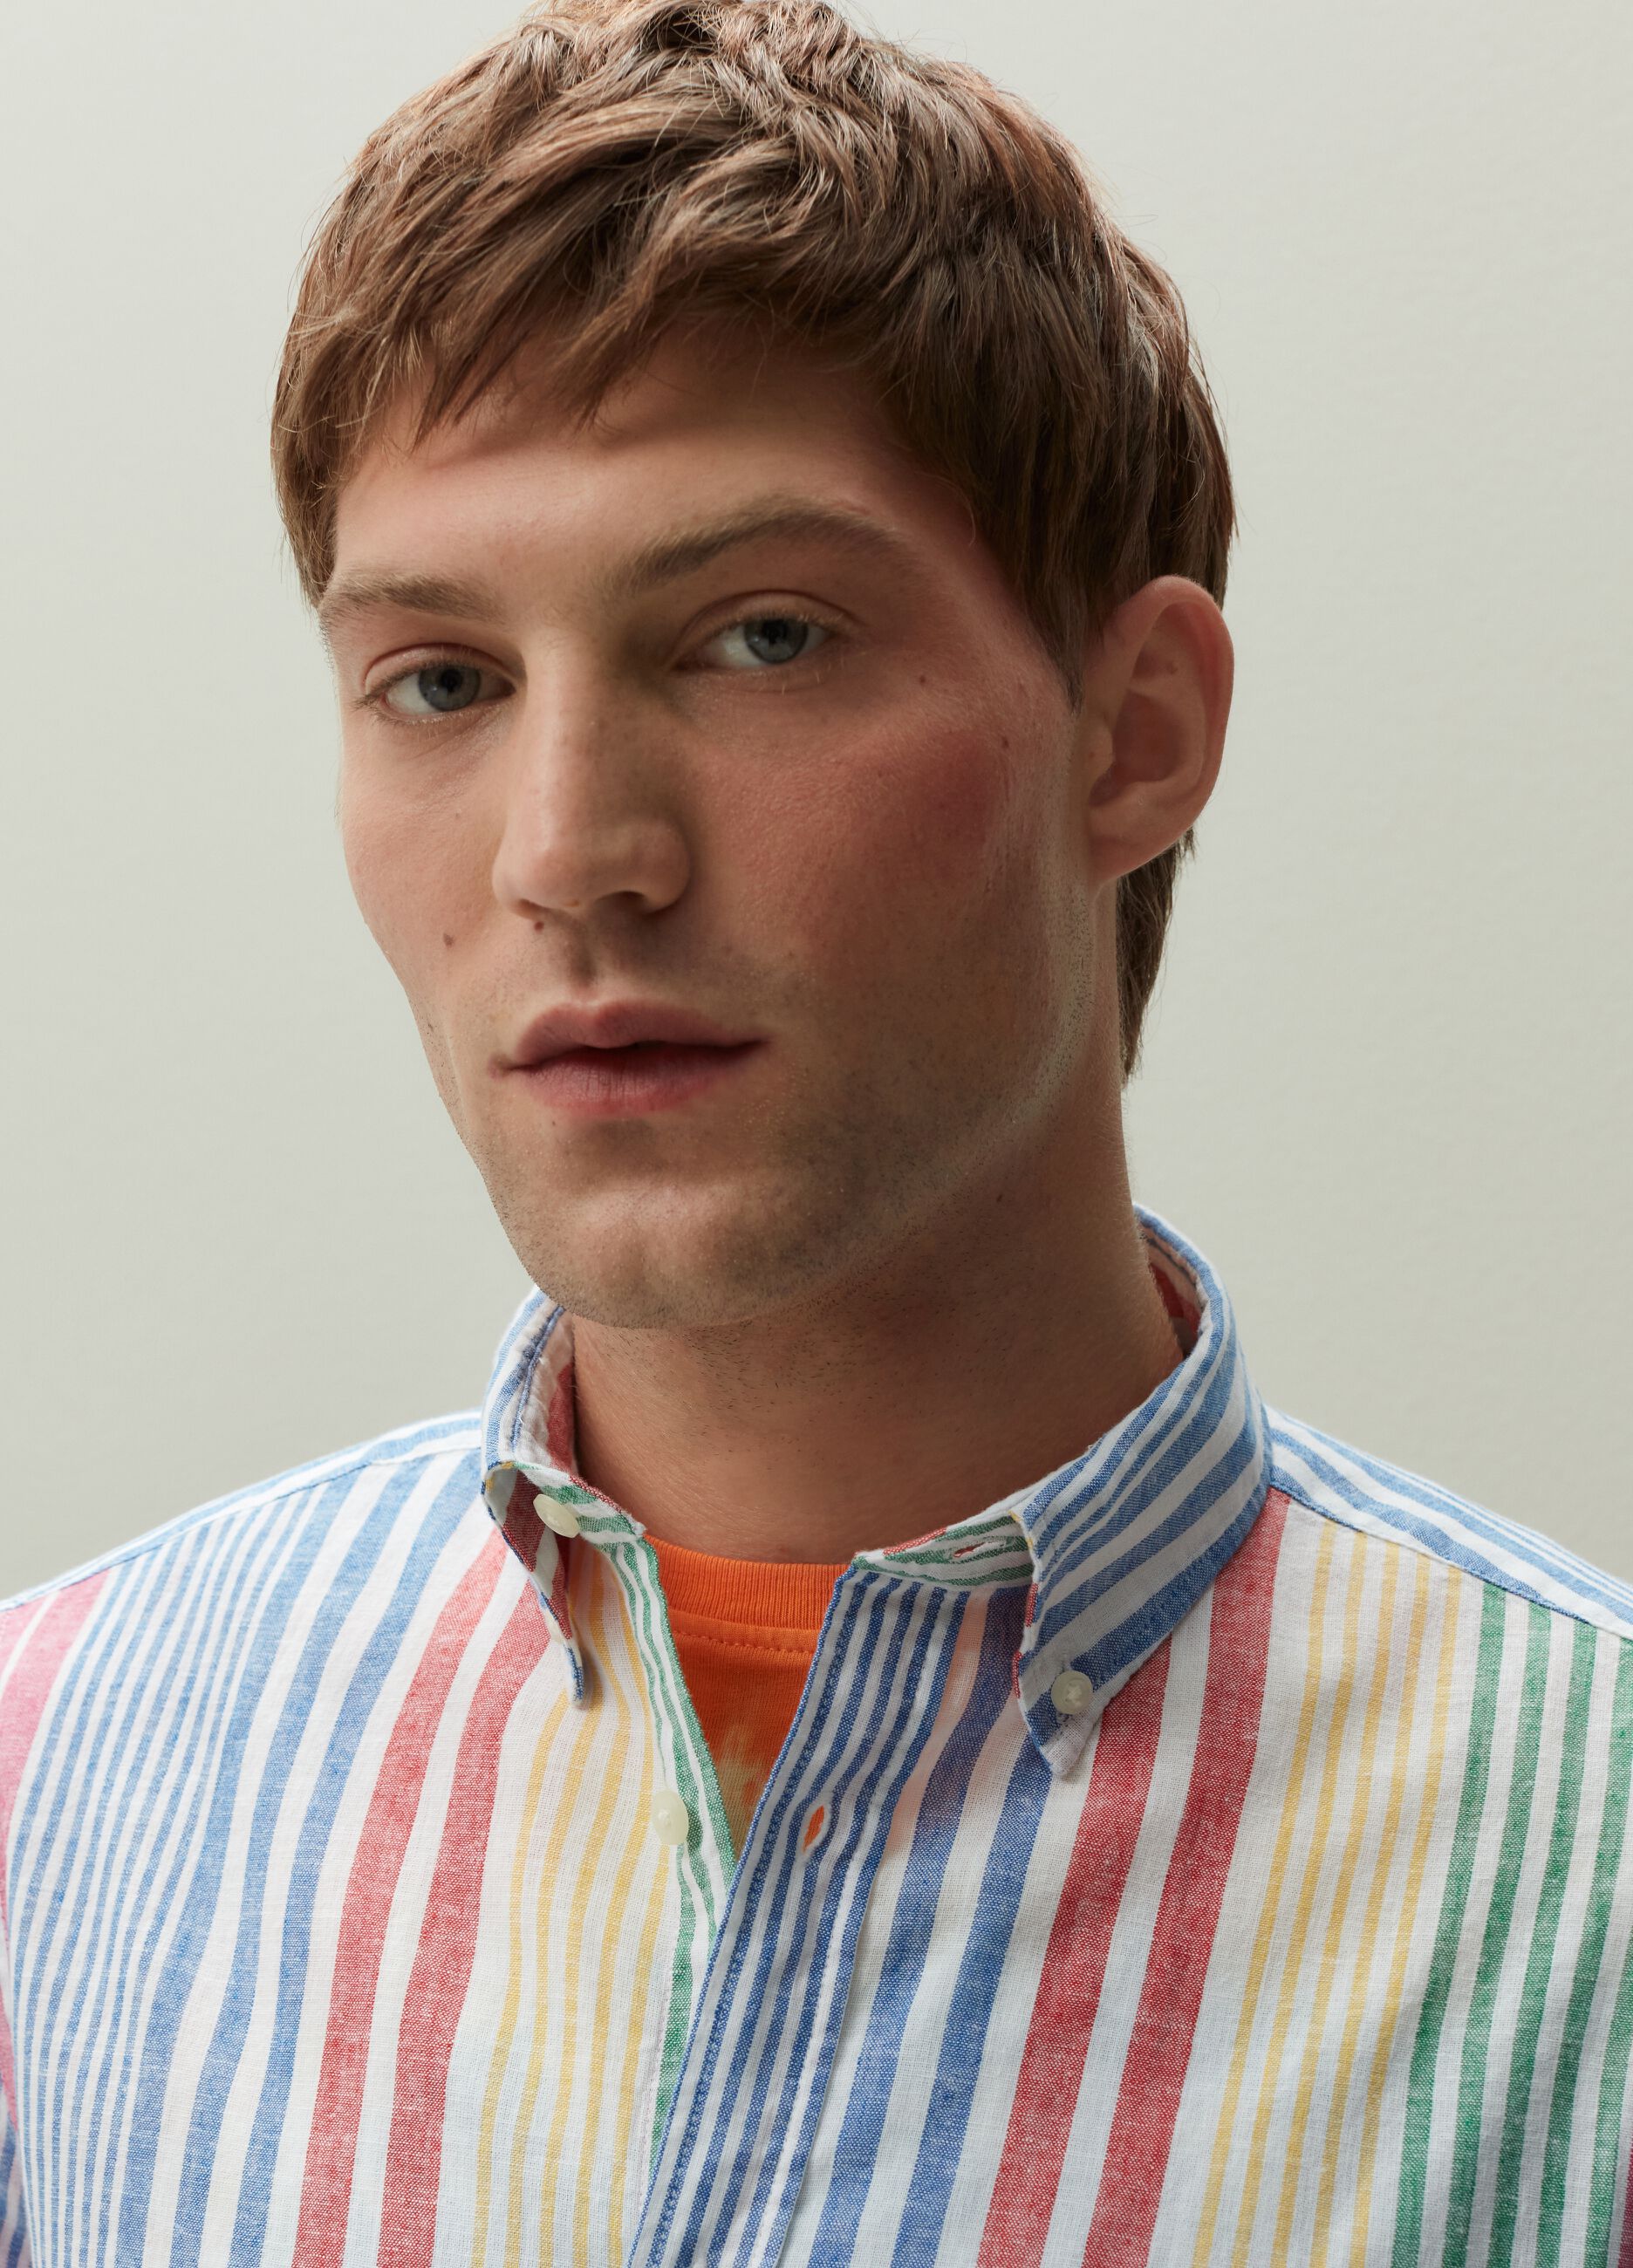 Regular-fit shirt with multicoloured stripes